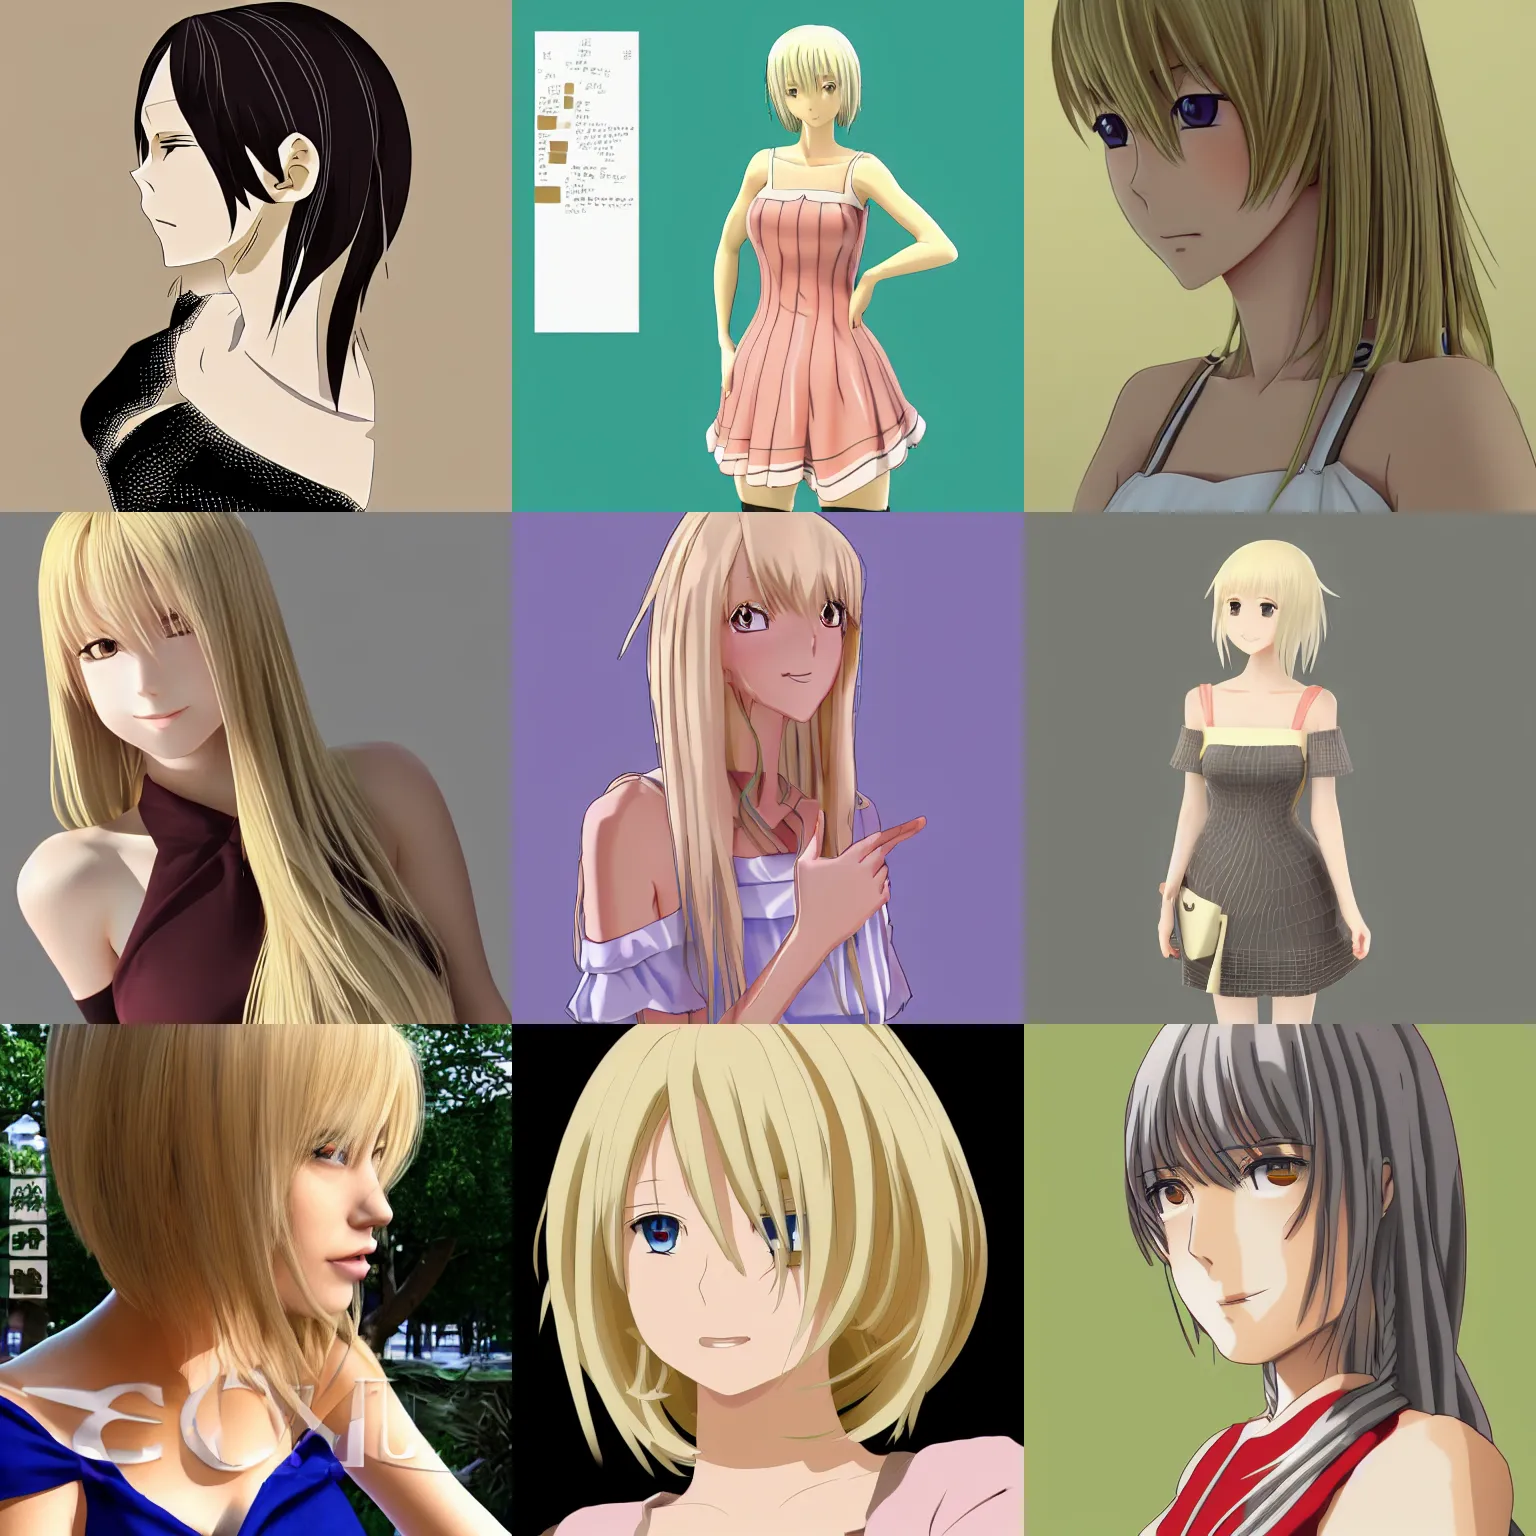 Prompt: high quality anime-style 3d image of a woman in her 20s wearing a summer dress, light blonde shoulder-length hair, the color palette is dark yet still rich